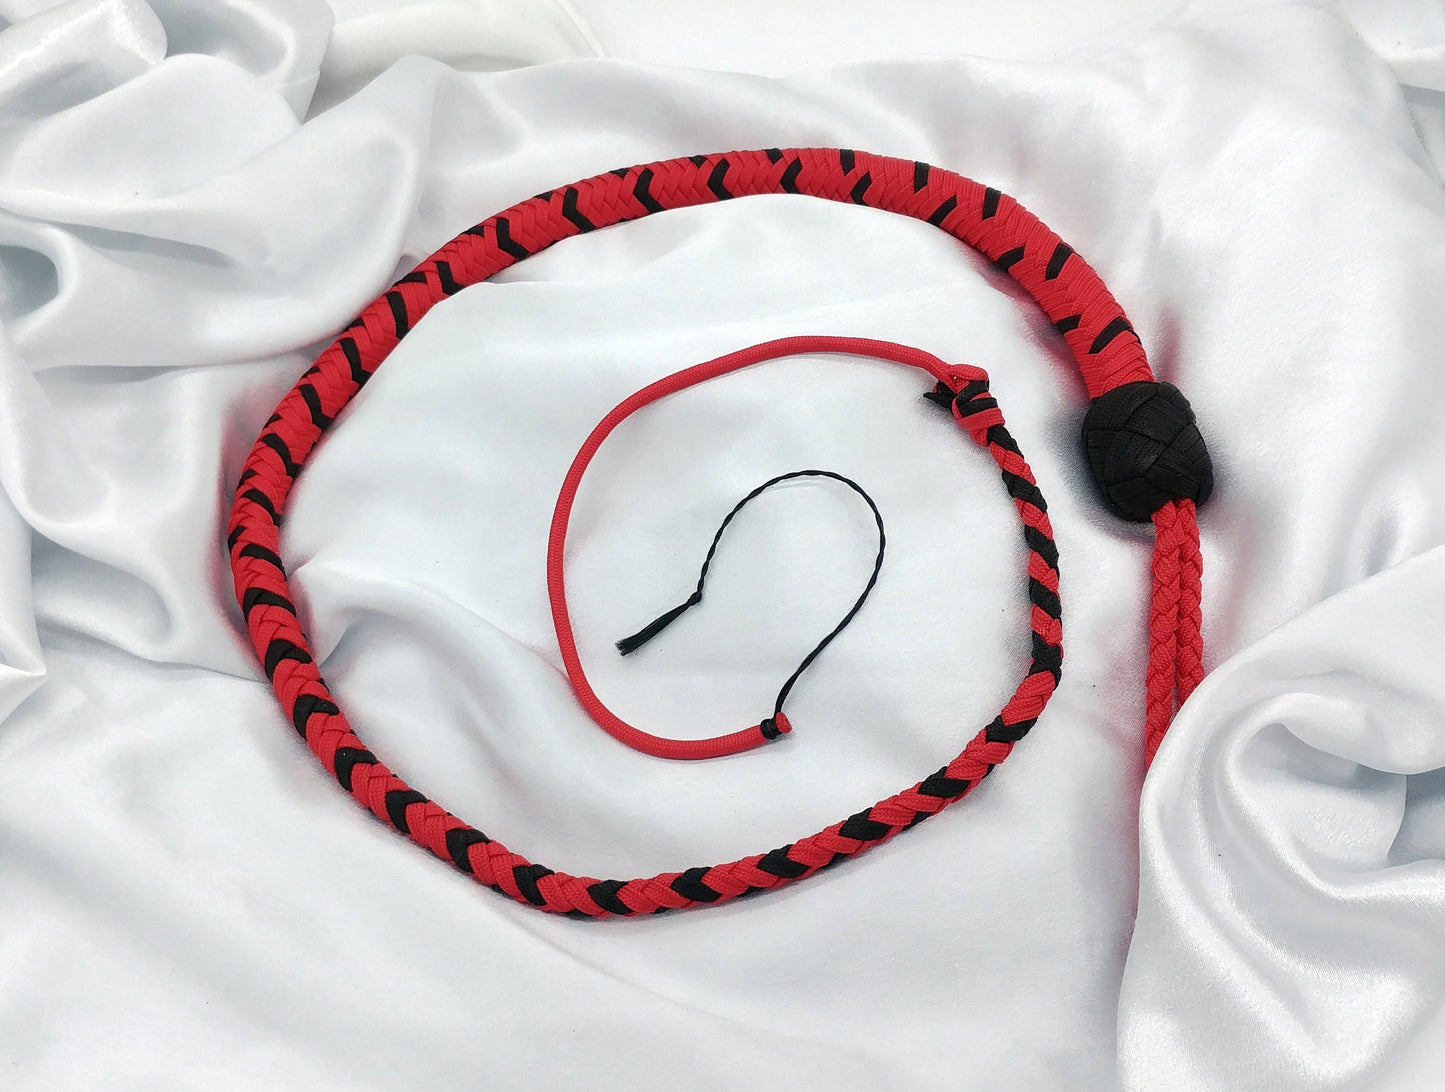 Red and black paracord whip